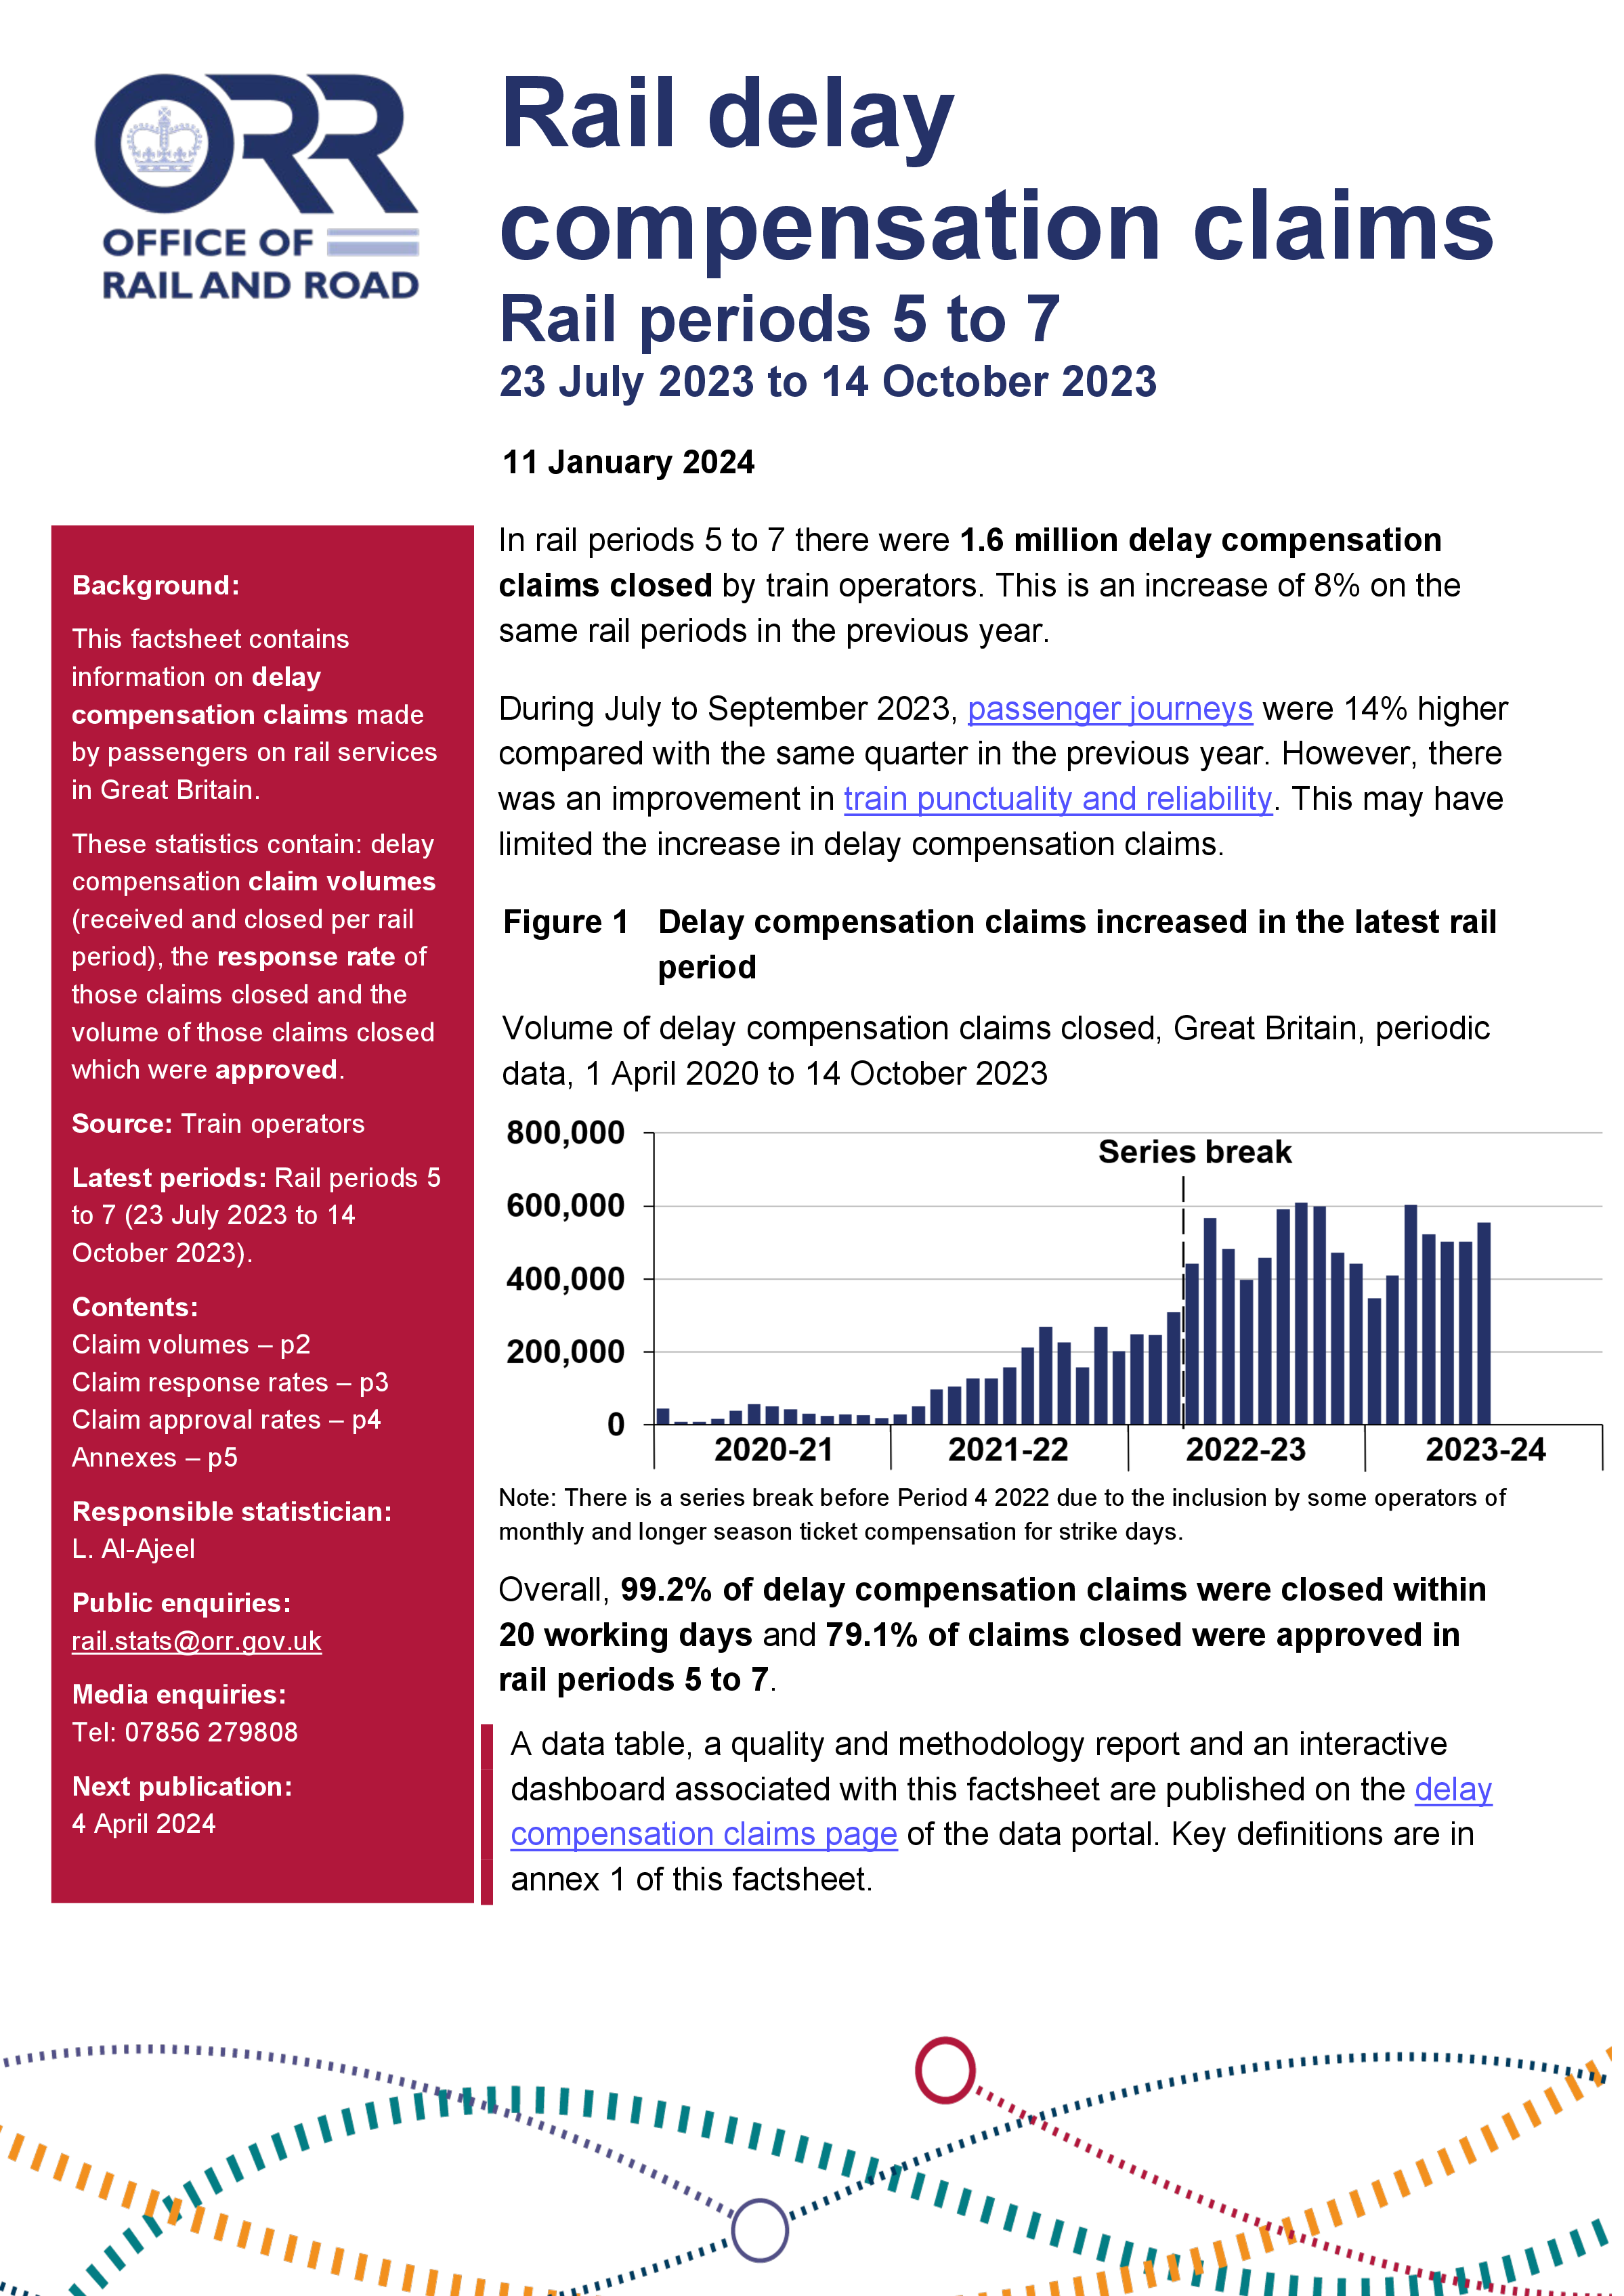 Delays compensation claims, rail periods 5 to 7 (23 July to 14 October 2023)